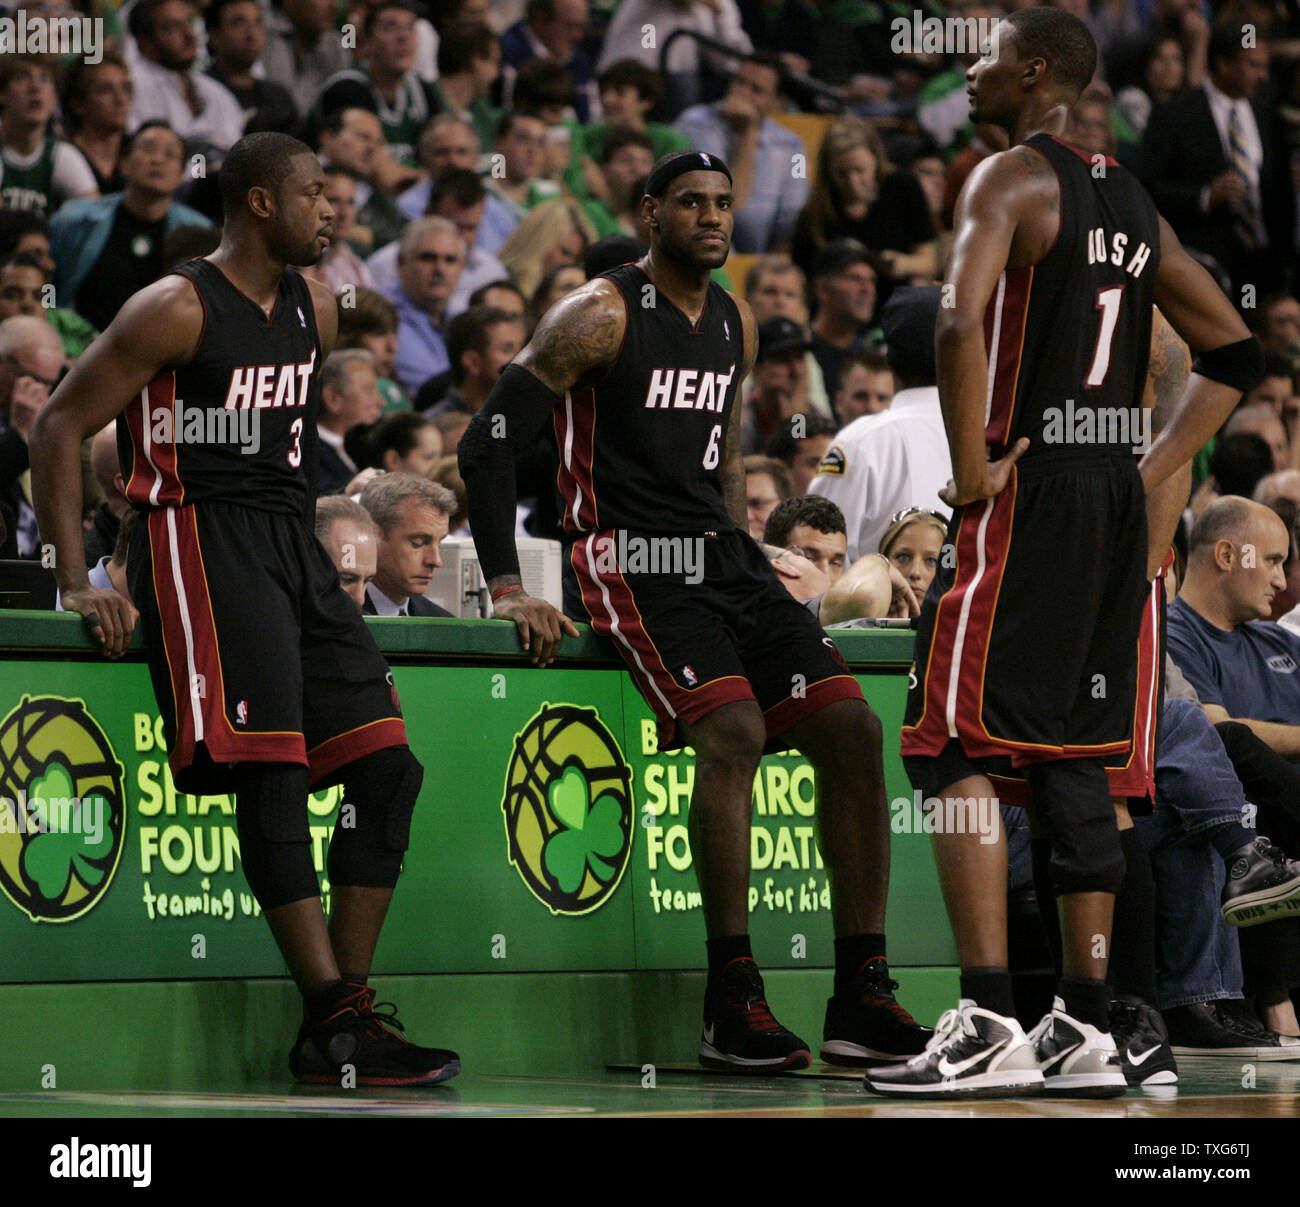 12 years ago today, LeBron James and Chris Bosh were welcomed to